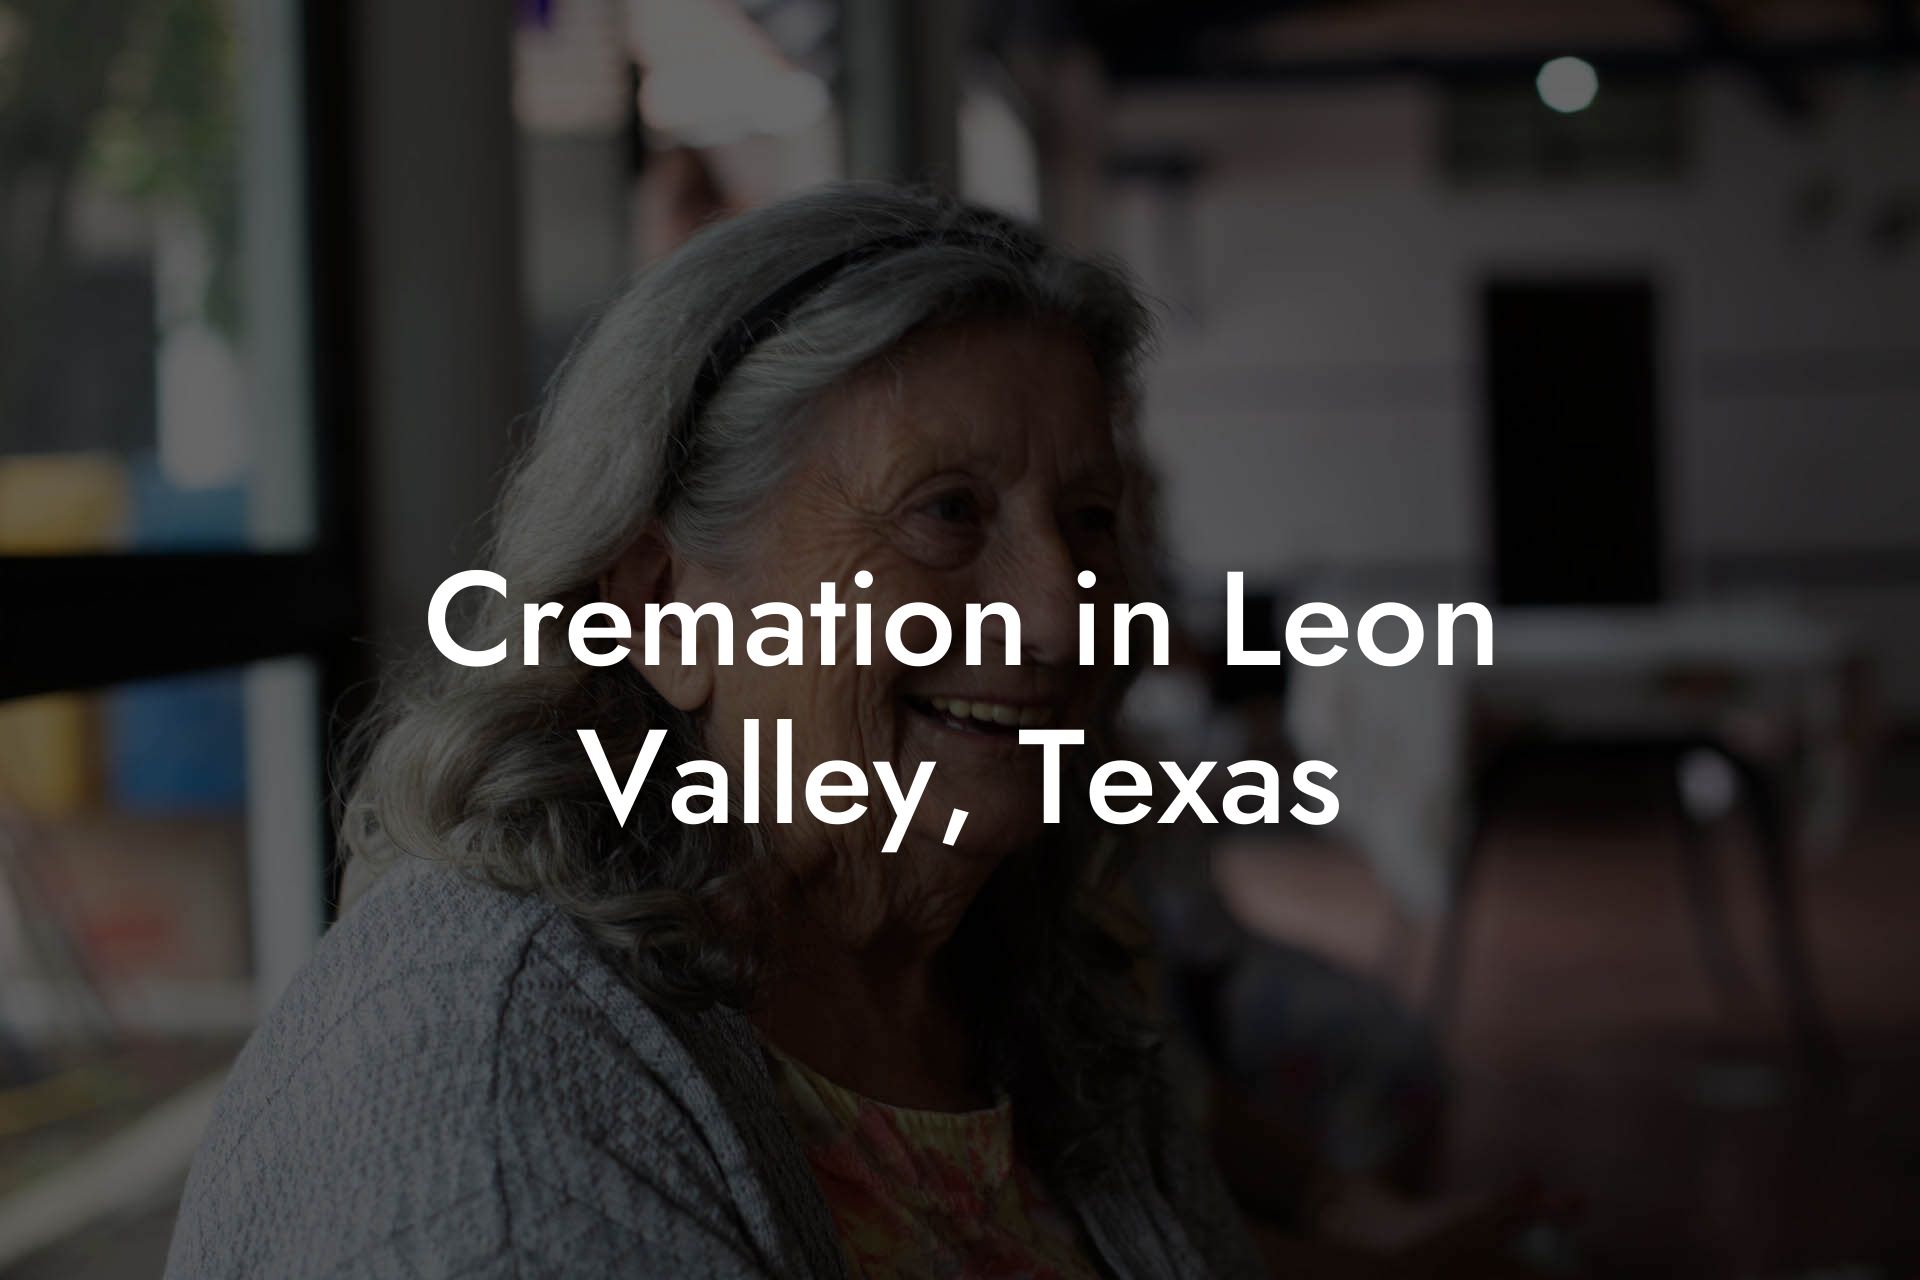 Cremation in Leon Valley, Texas